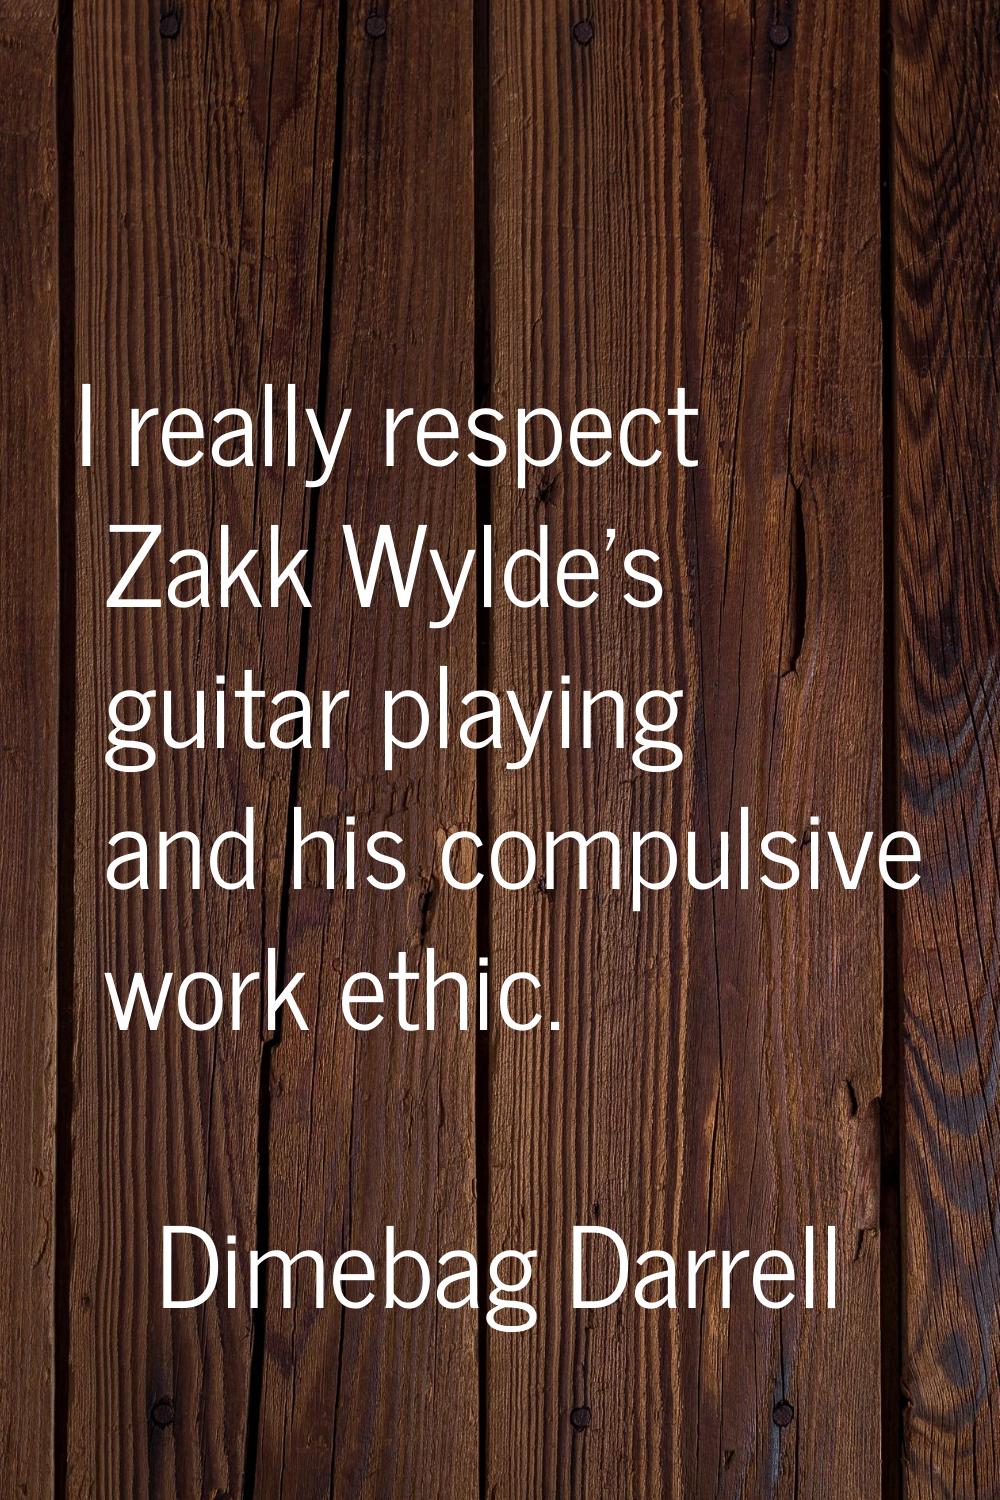 I really respect Zakk Wylde's guitar playing and his compulsive work ethic.